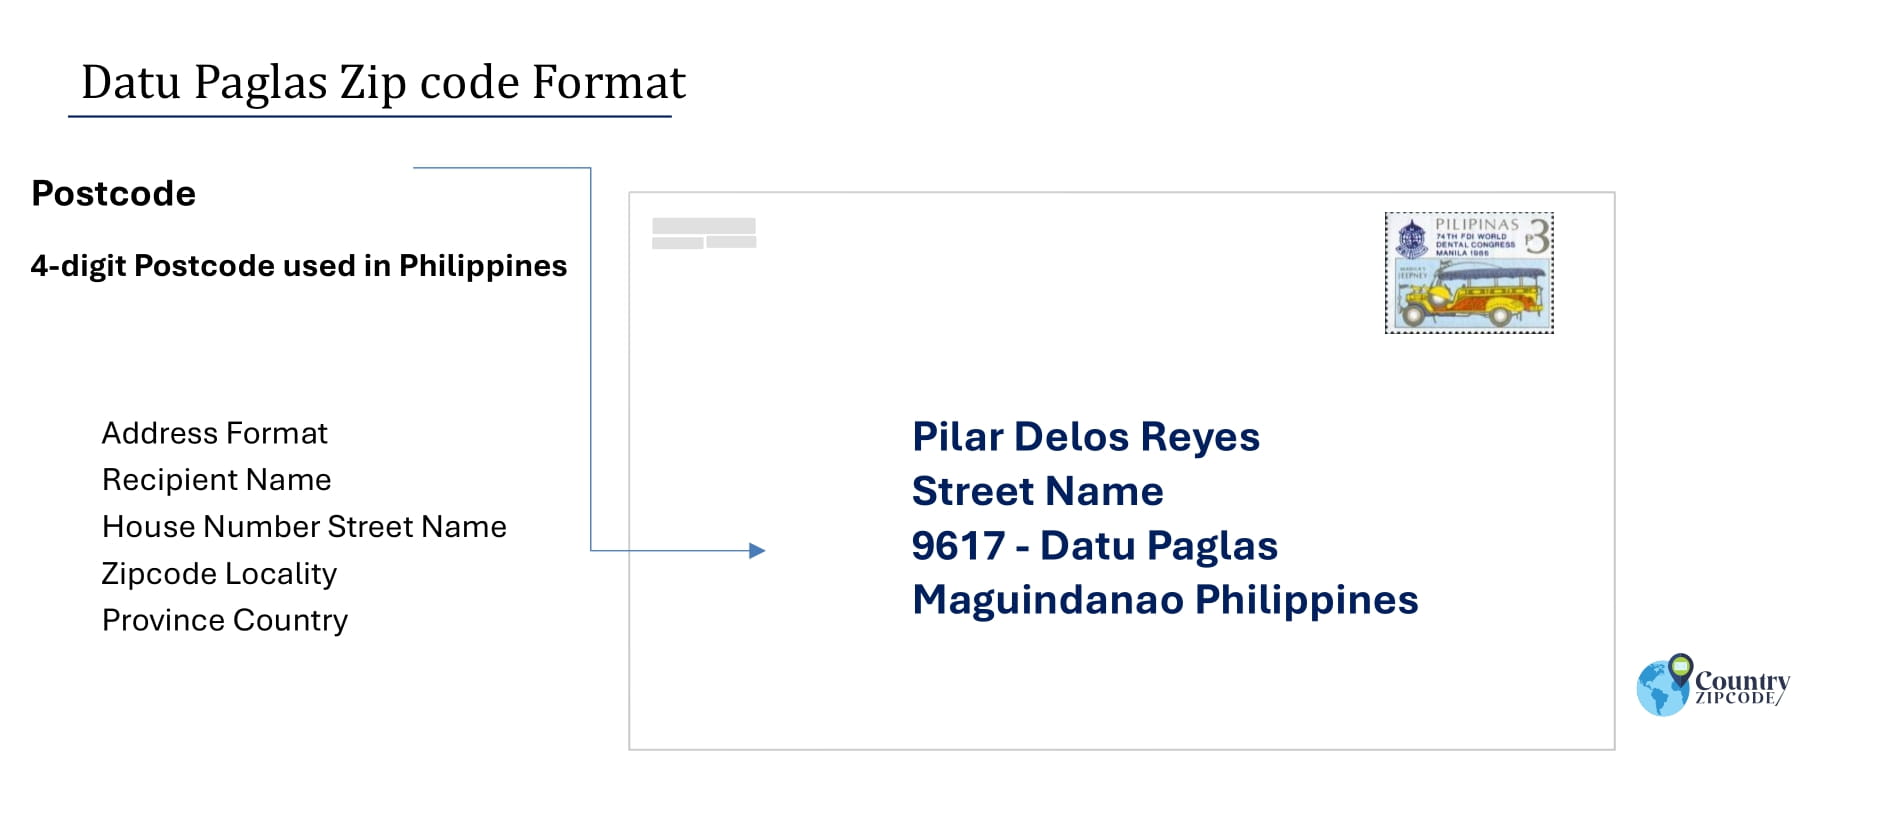 example of Datu Paglas Philippines zip code and address format